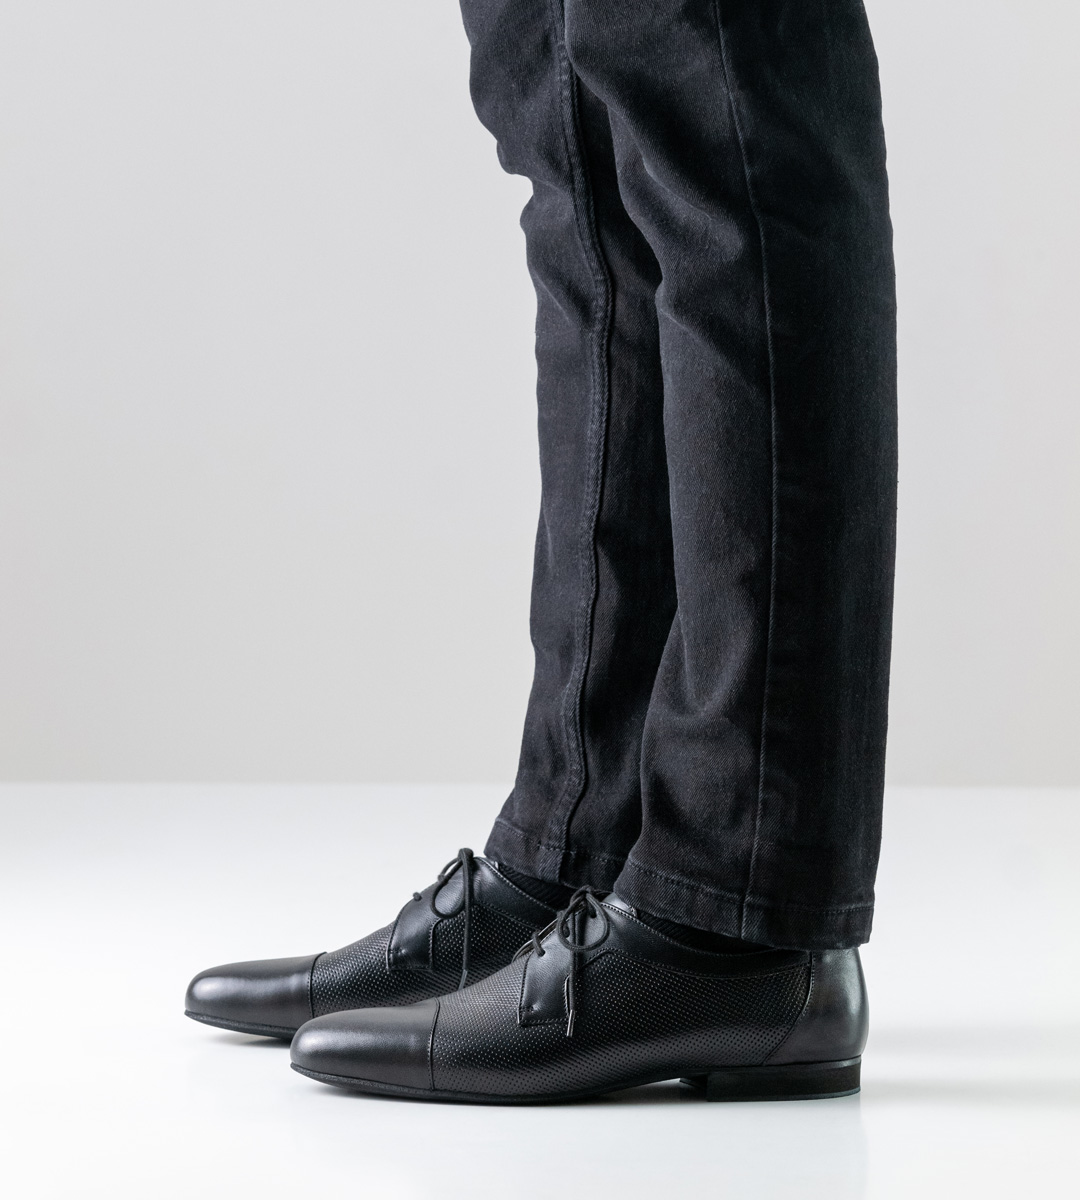 Werner Kern men's dance shoe with 1.5 cm micro heel in combination with black chinos